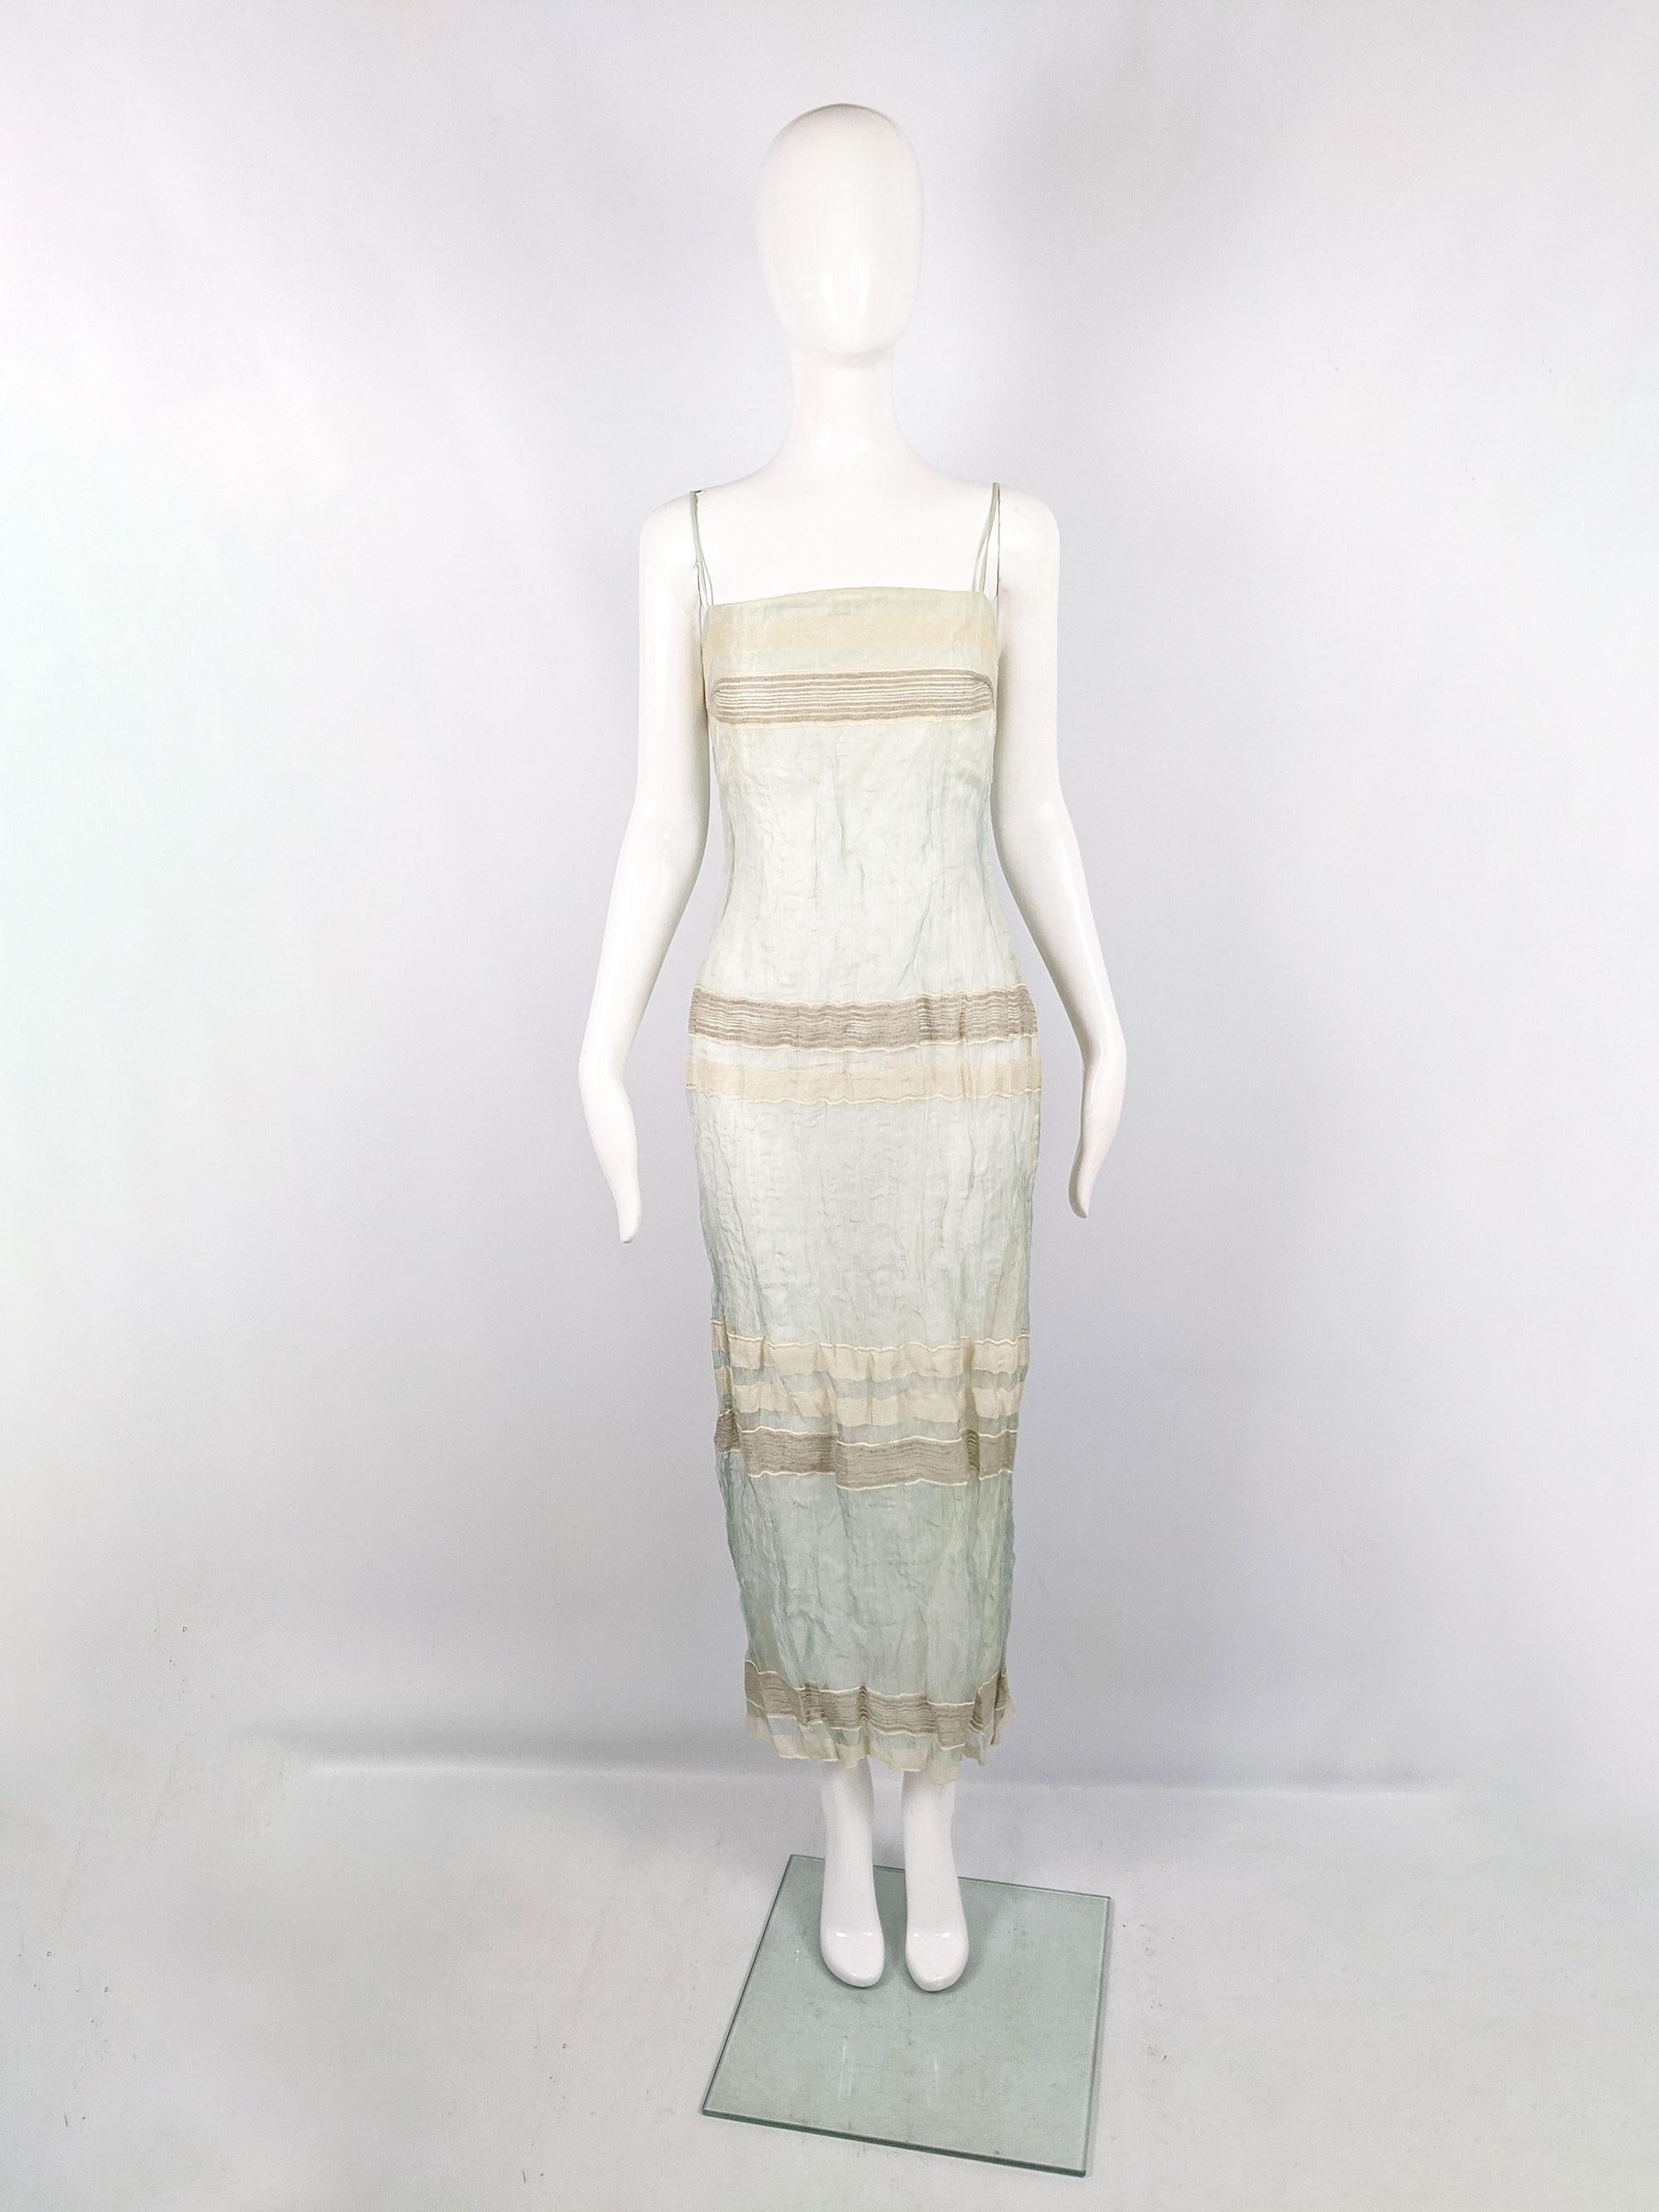 A stunning, effortless vintage womens strapless dress from the 90s by Gianfranco Ferré. It is made from an incredible pastel blue, crinkled organza with beige woven linen stripes throughout. Perfect for summer or at a party in the evening. Can be